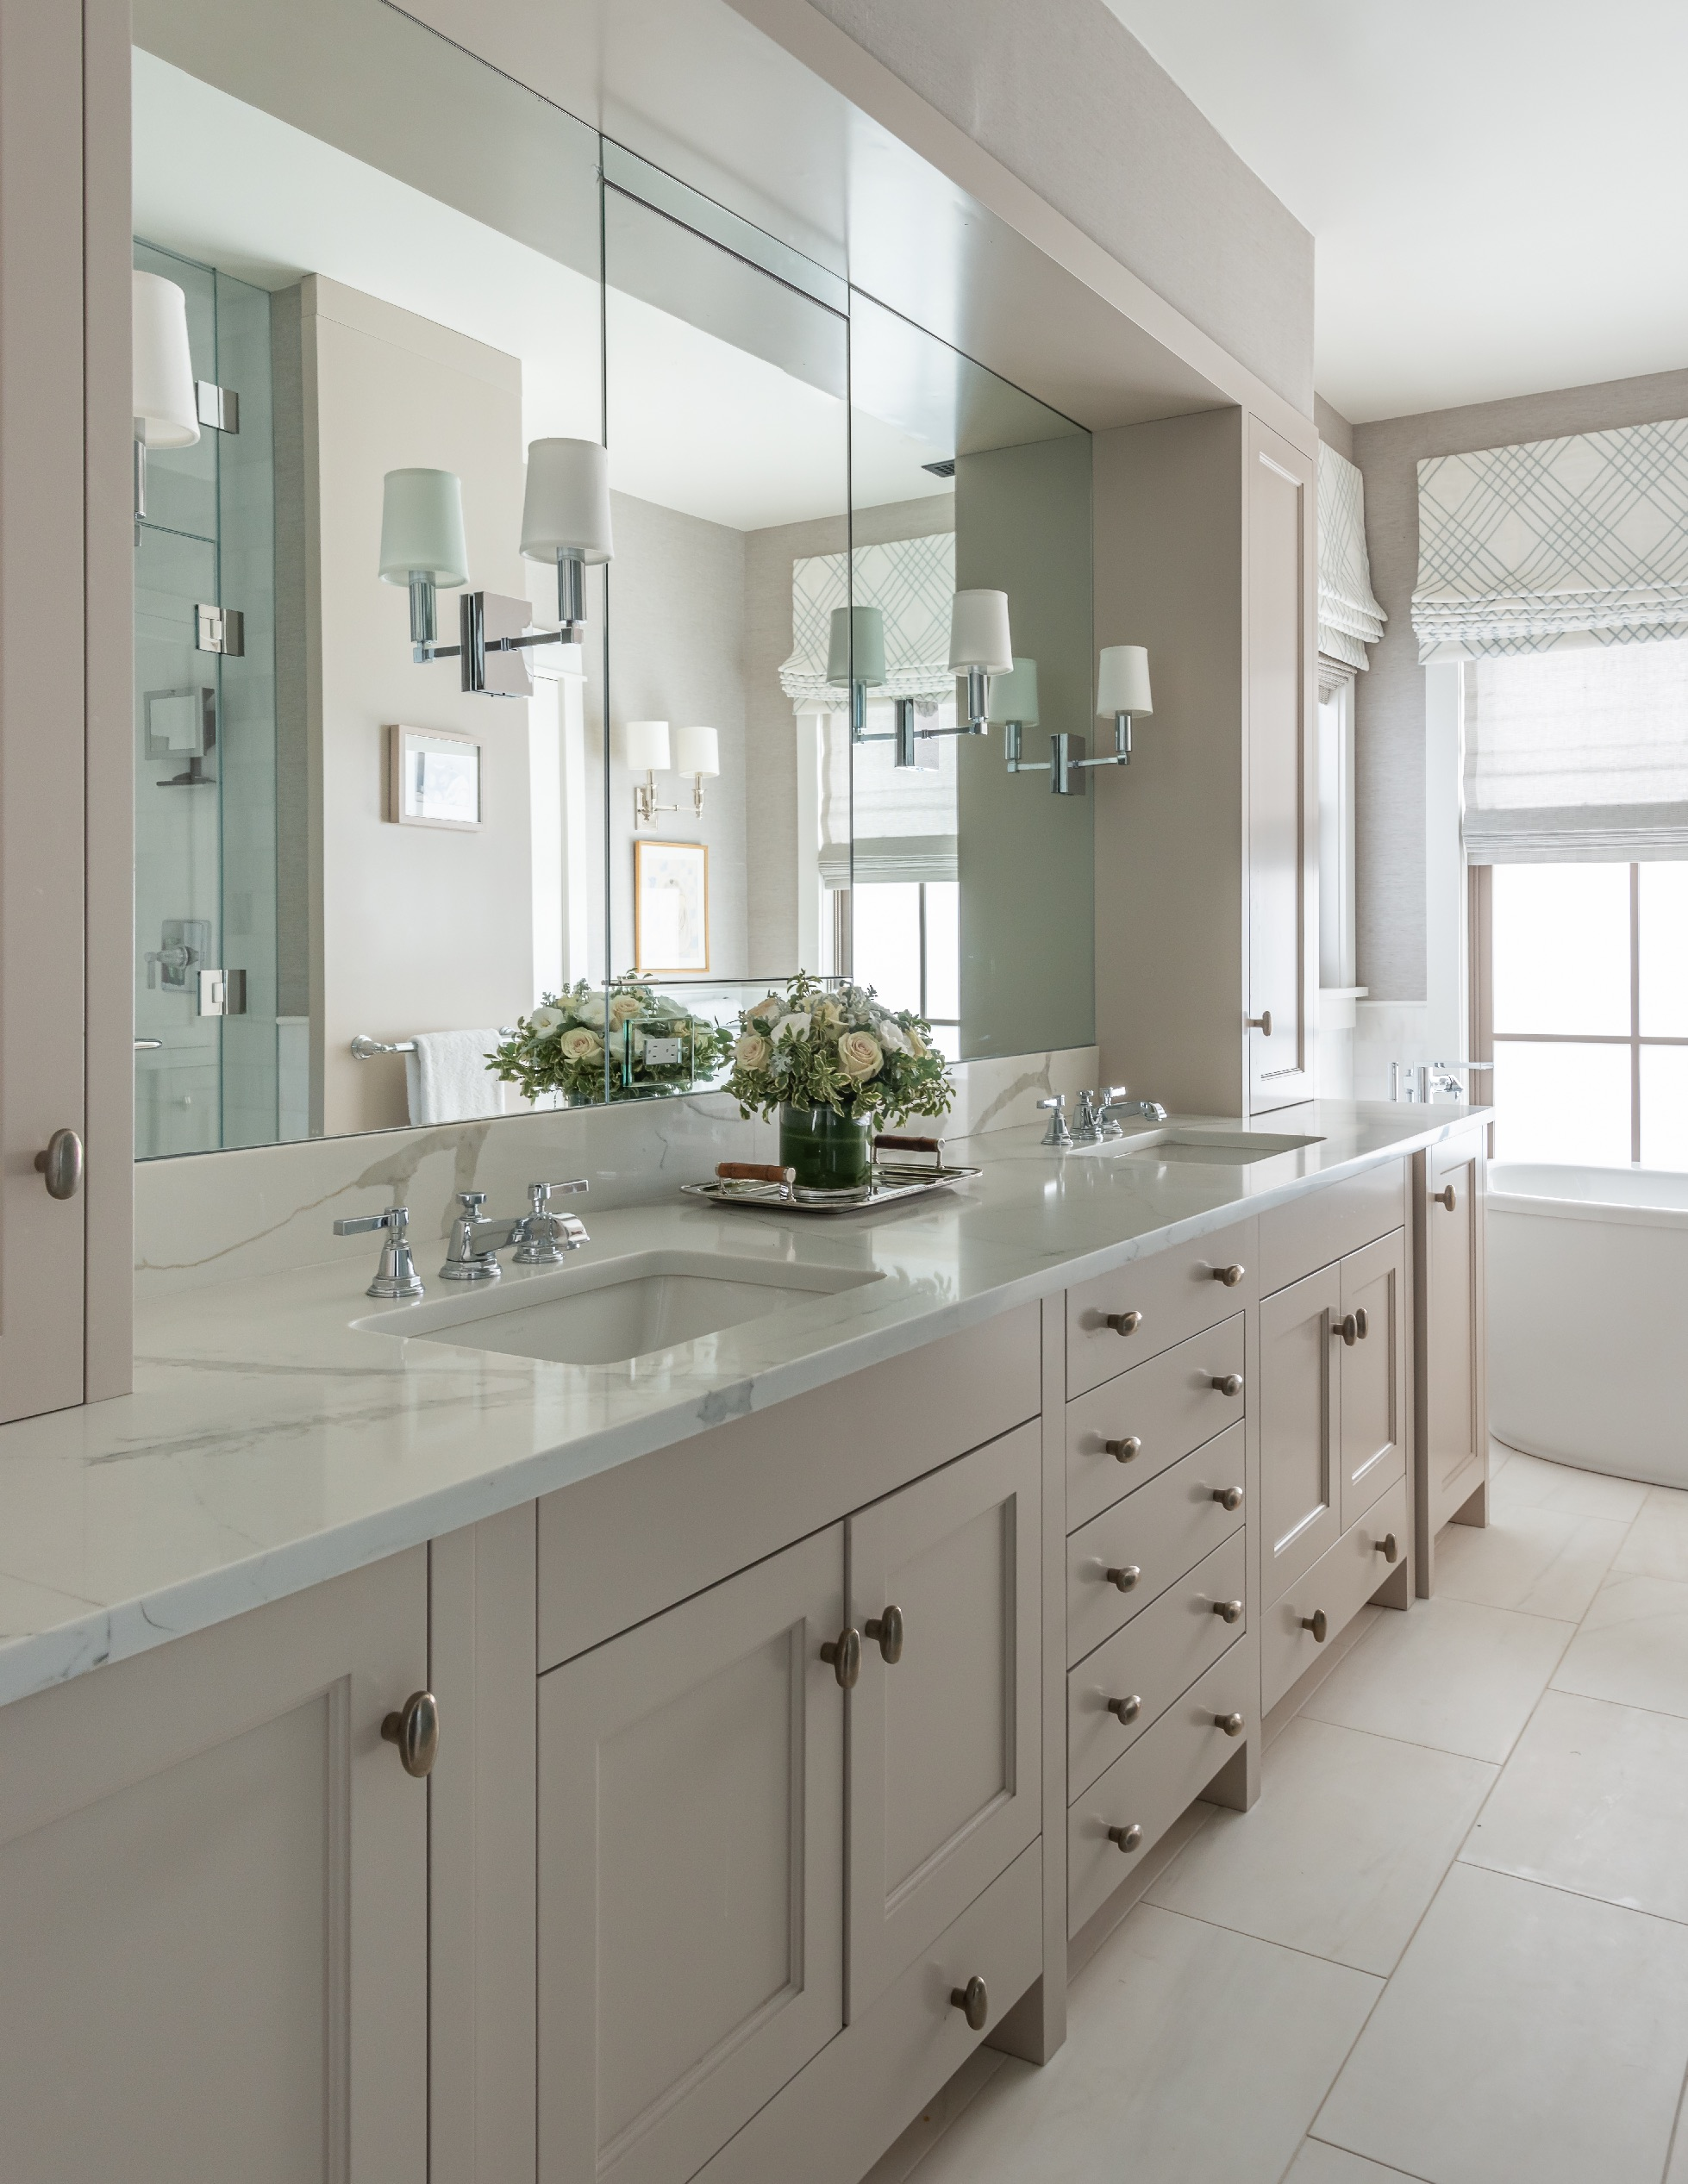  Vacation Home Bathroom. Snedens Landing Residence by Alan Tanksley, Inc..